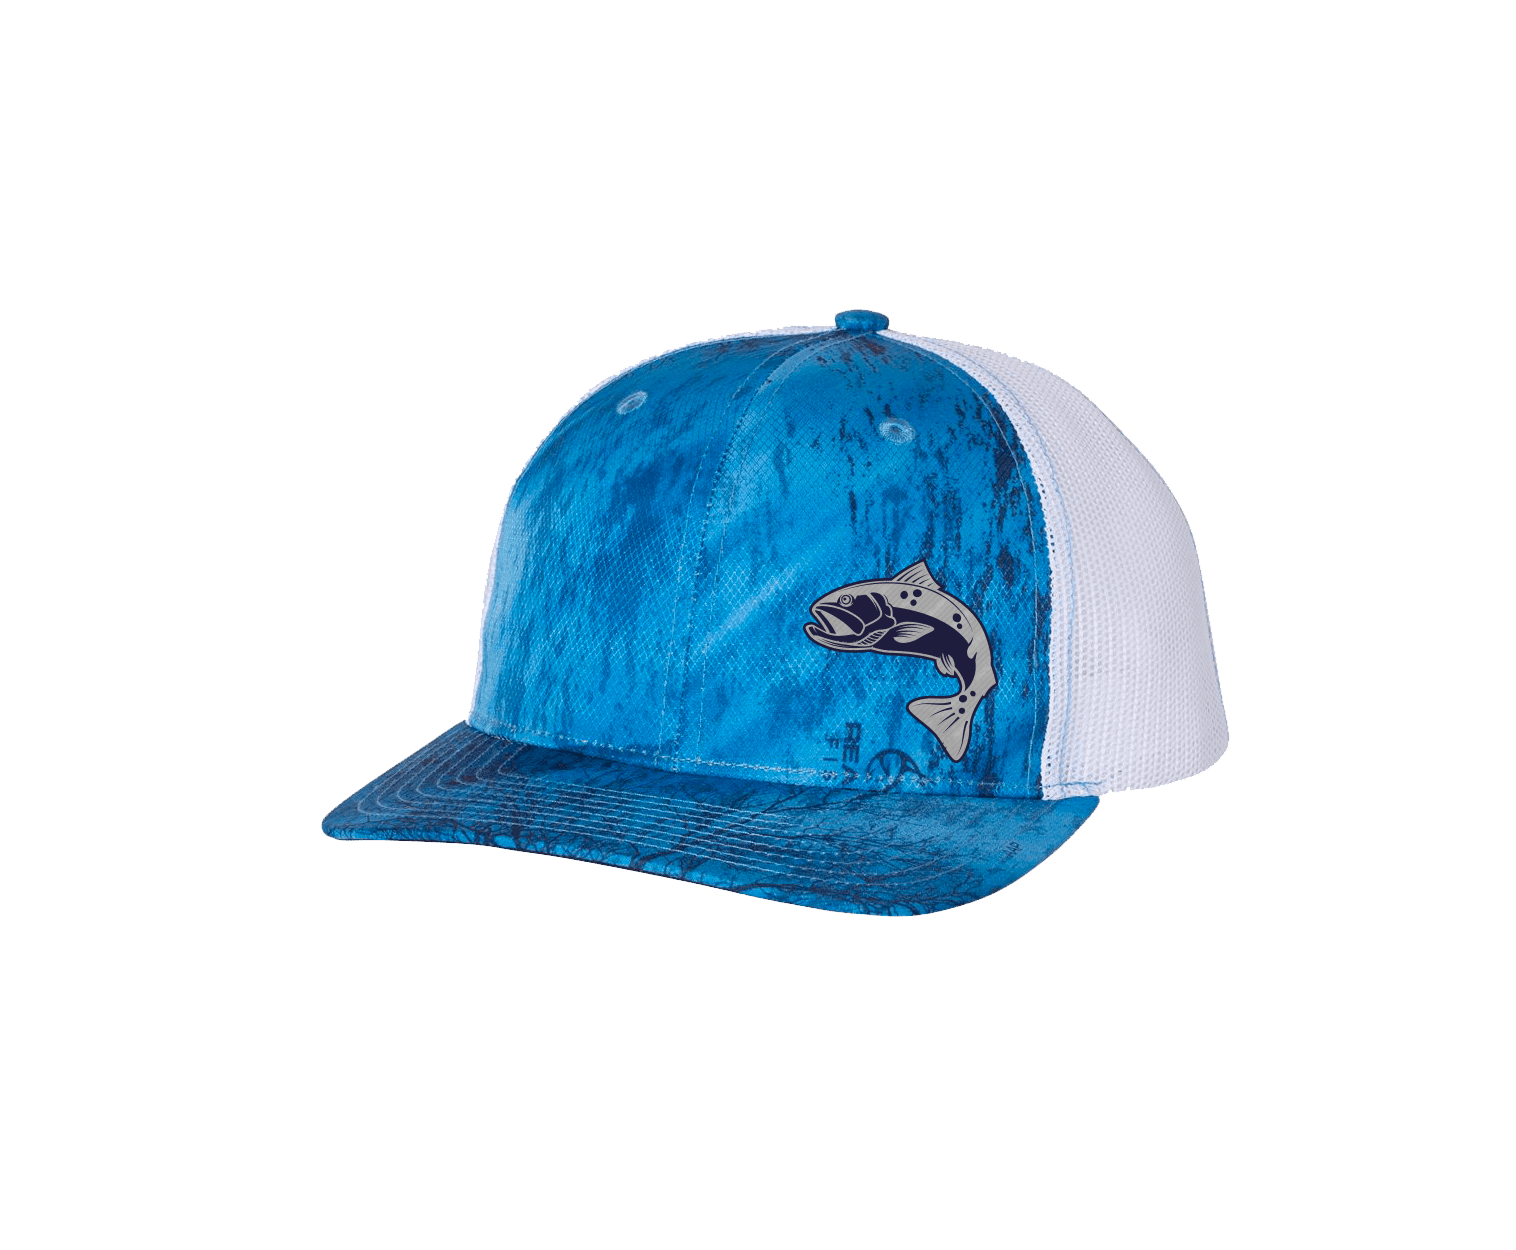 Men's Fish Hook Embroidered Outdoors Realtree Fishing Camo Mesh Back  Trucker Hat, Blue/White 